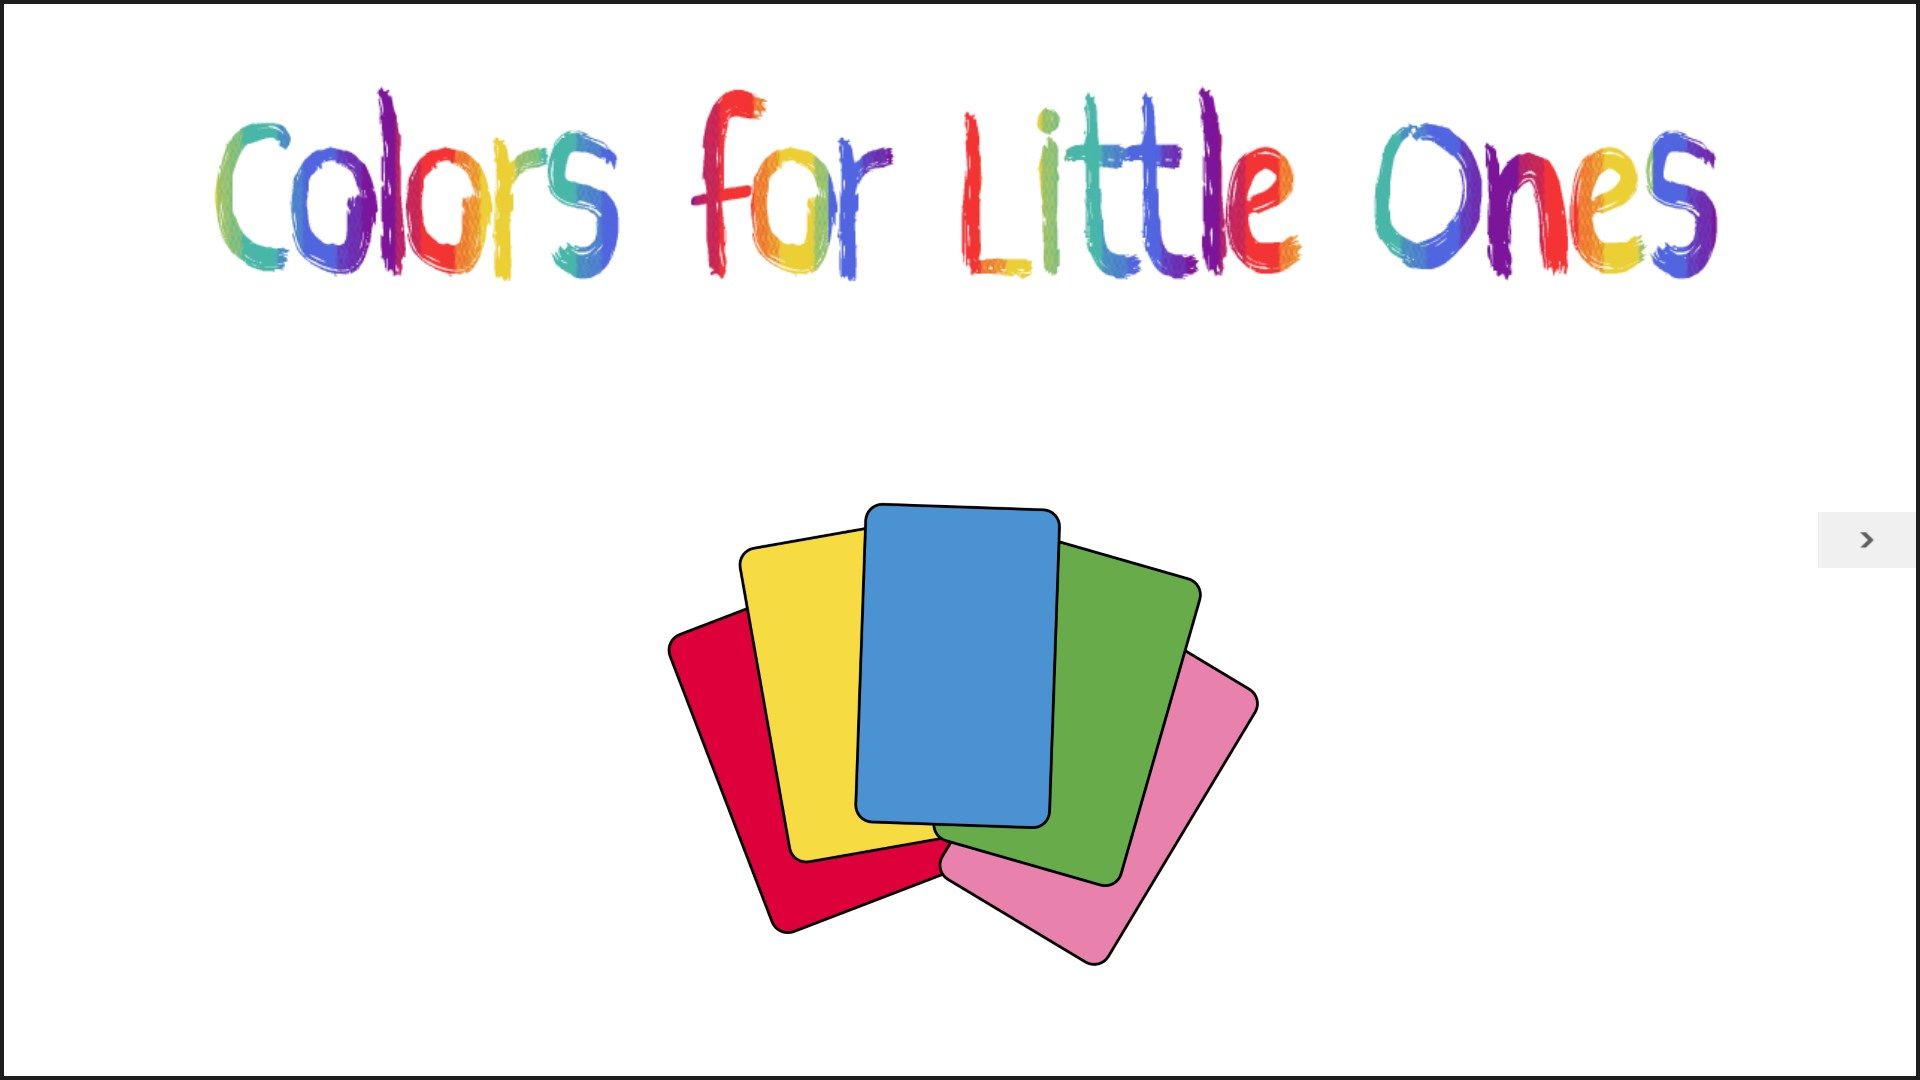 Colors for Little Ones